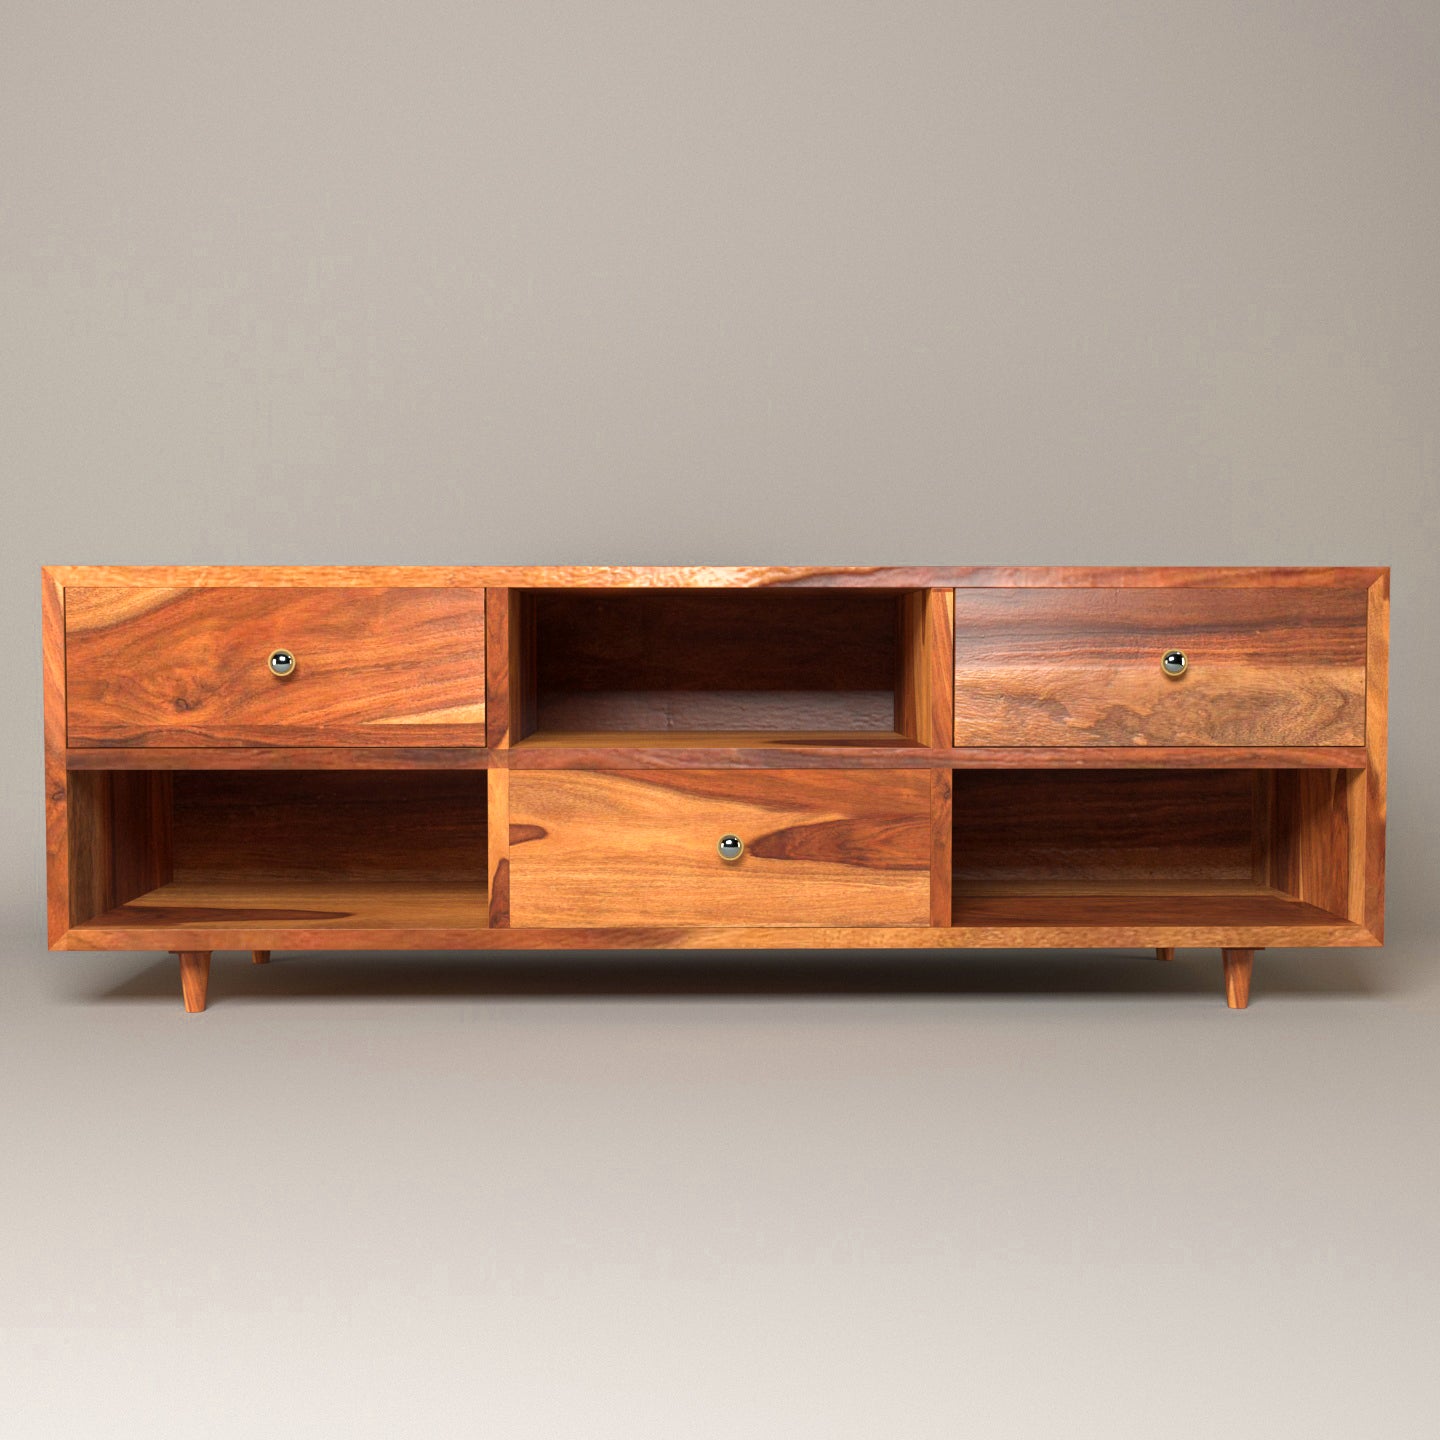 Melbourne Melody Style Wooden Handmade with Multi Storage TV Unit for Home Tv stand